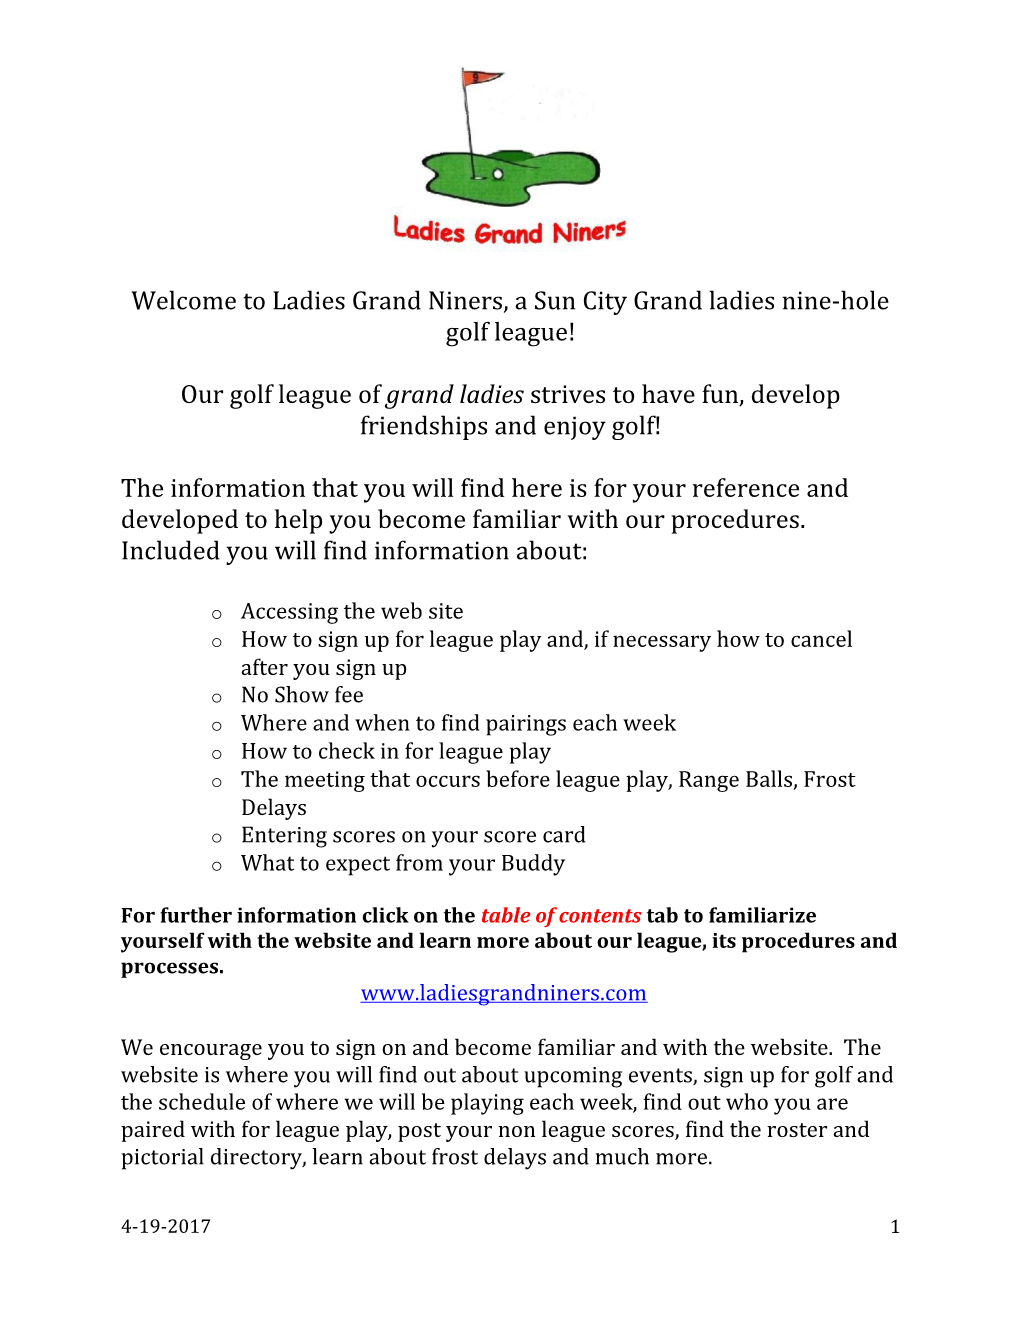 Welcome to Ladies Grand Niners, a Sun City Grand Ladies Nine-Hole Golf League!